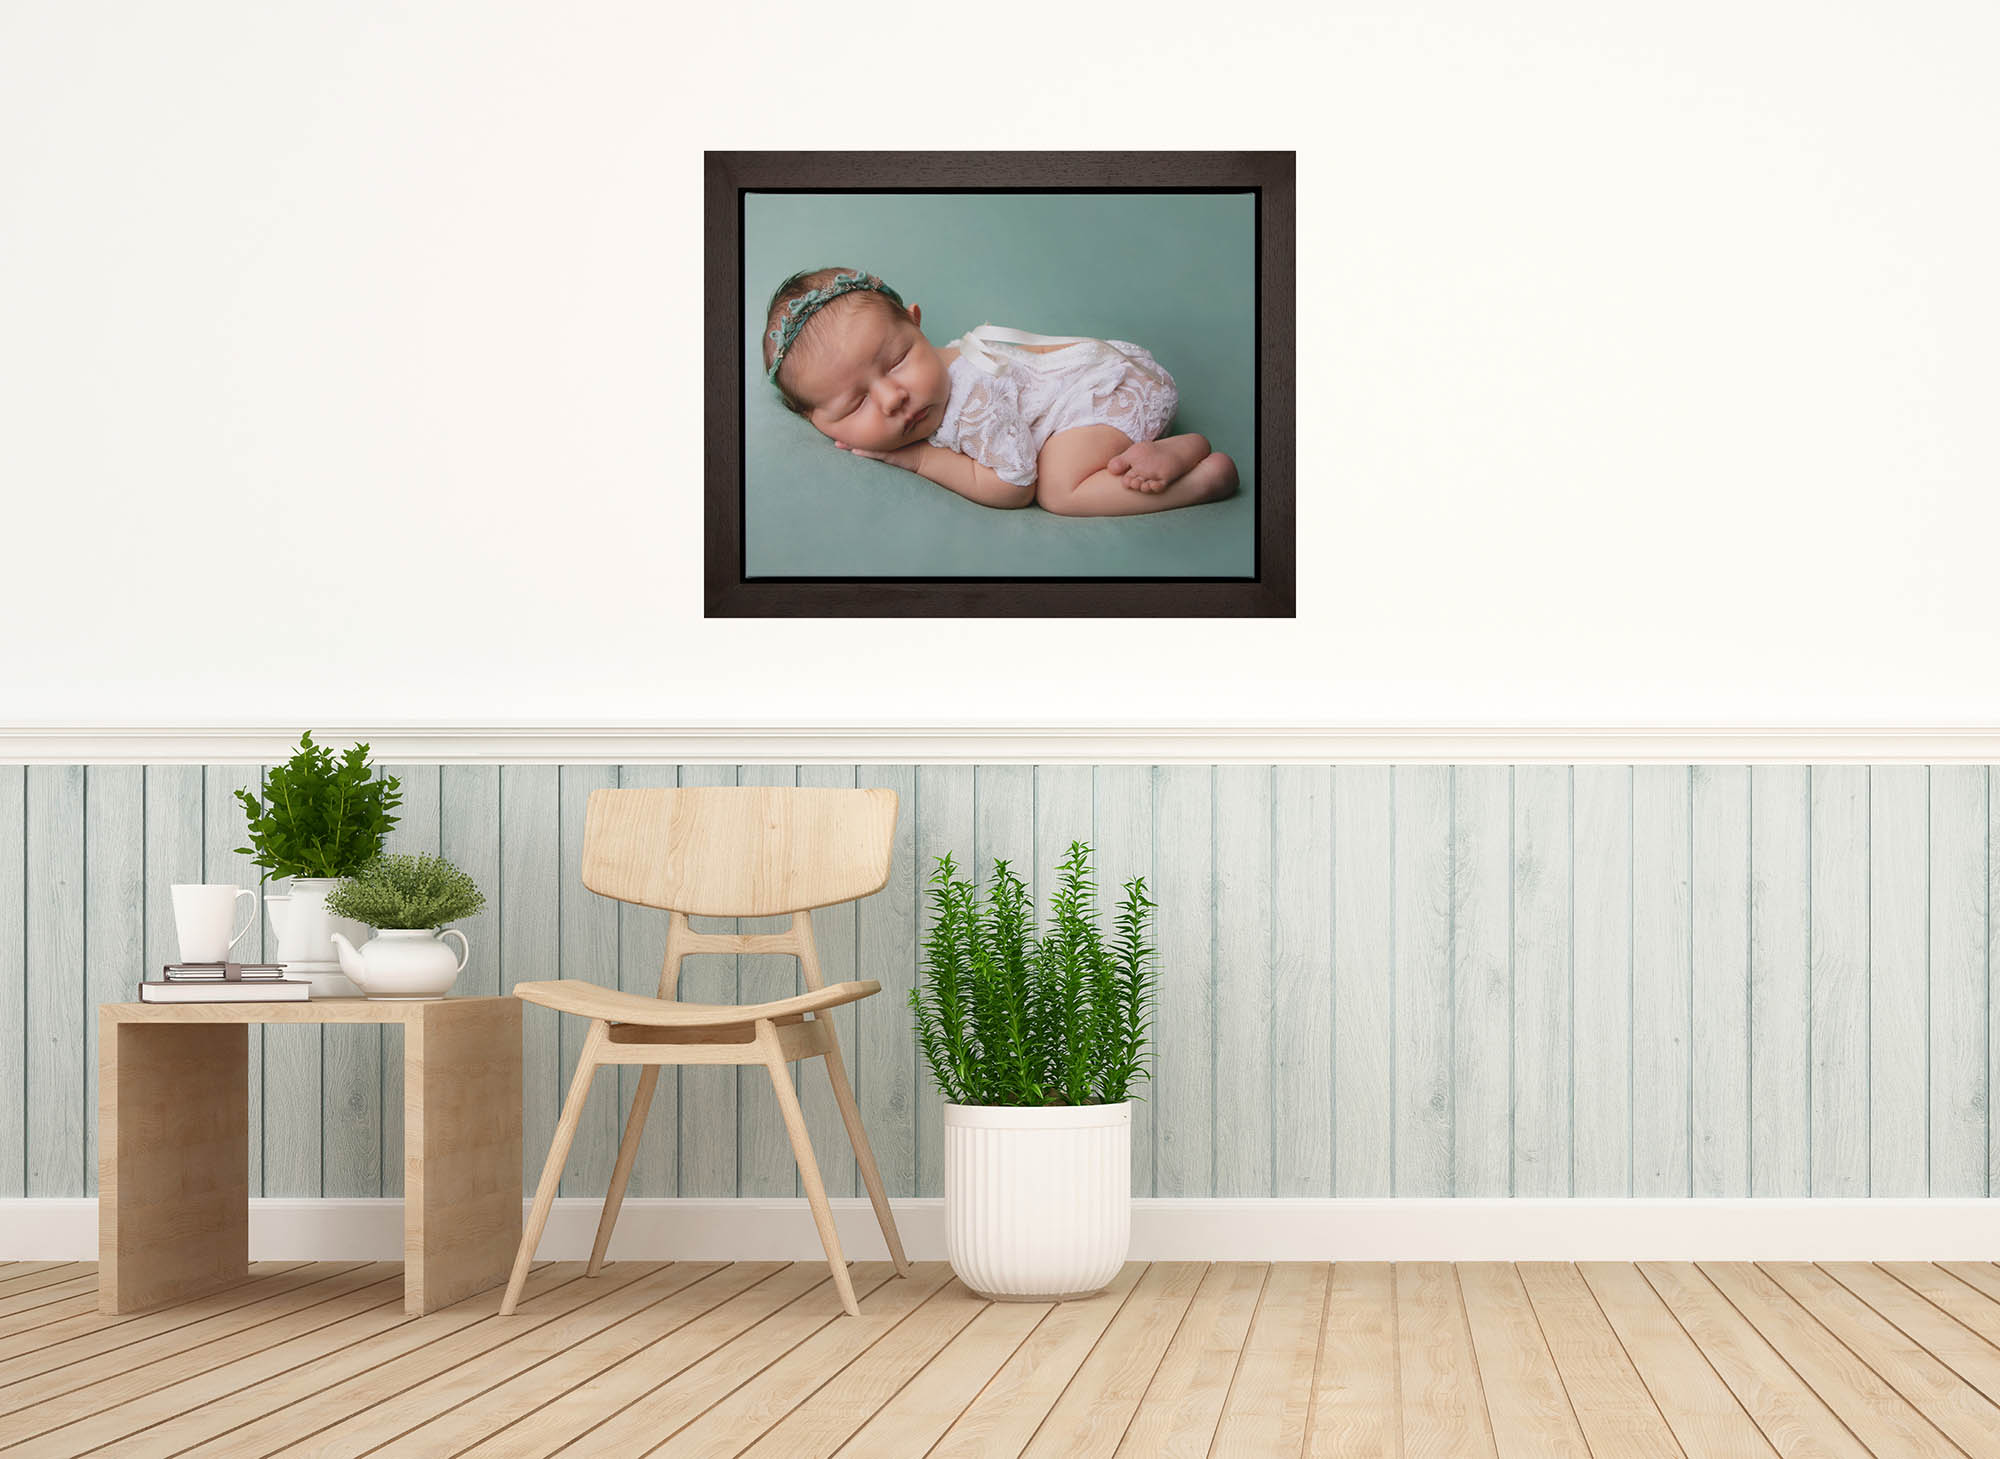 Framed canvas of a baby girl on a green blanket, shown on the wall in a dining area. Image provided to show wall art available following a newborn photoshoot by Glasgow photographer